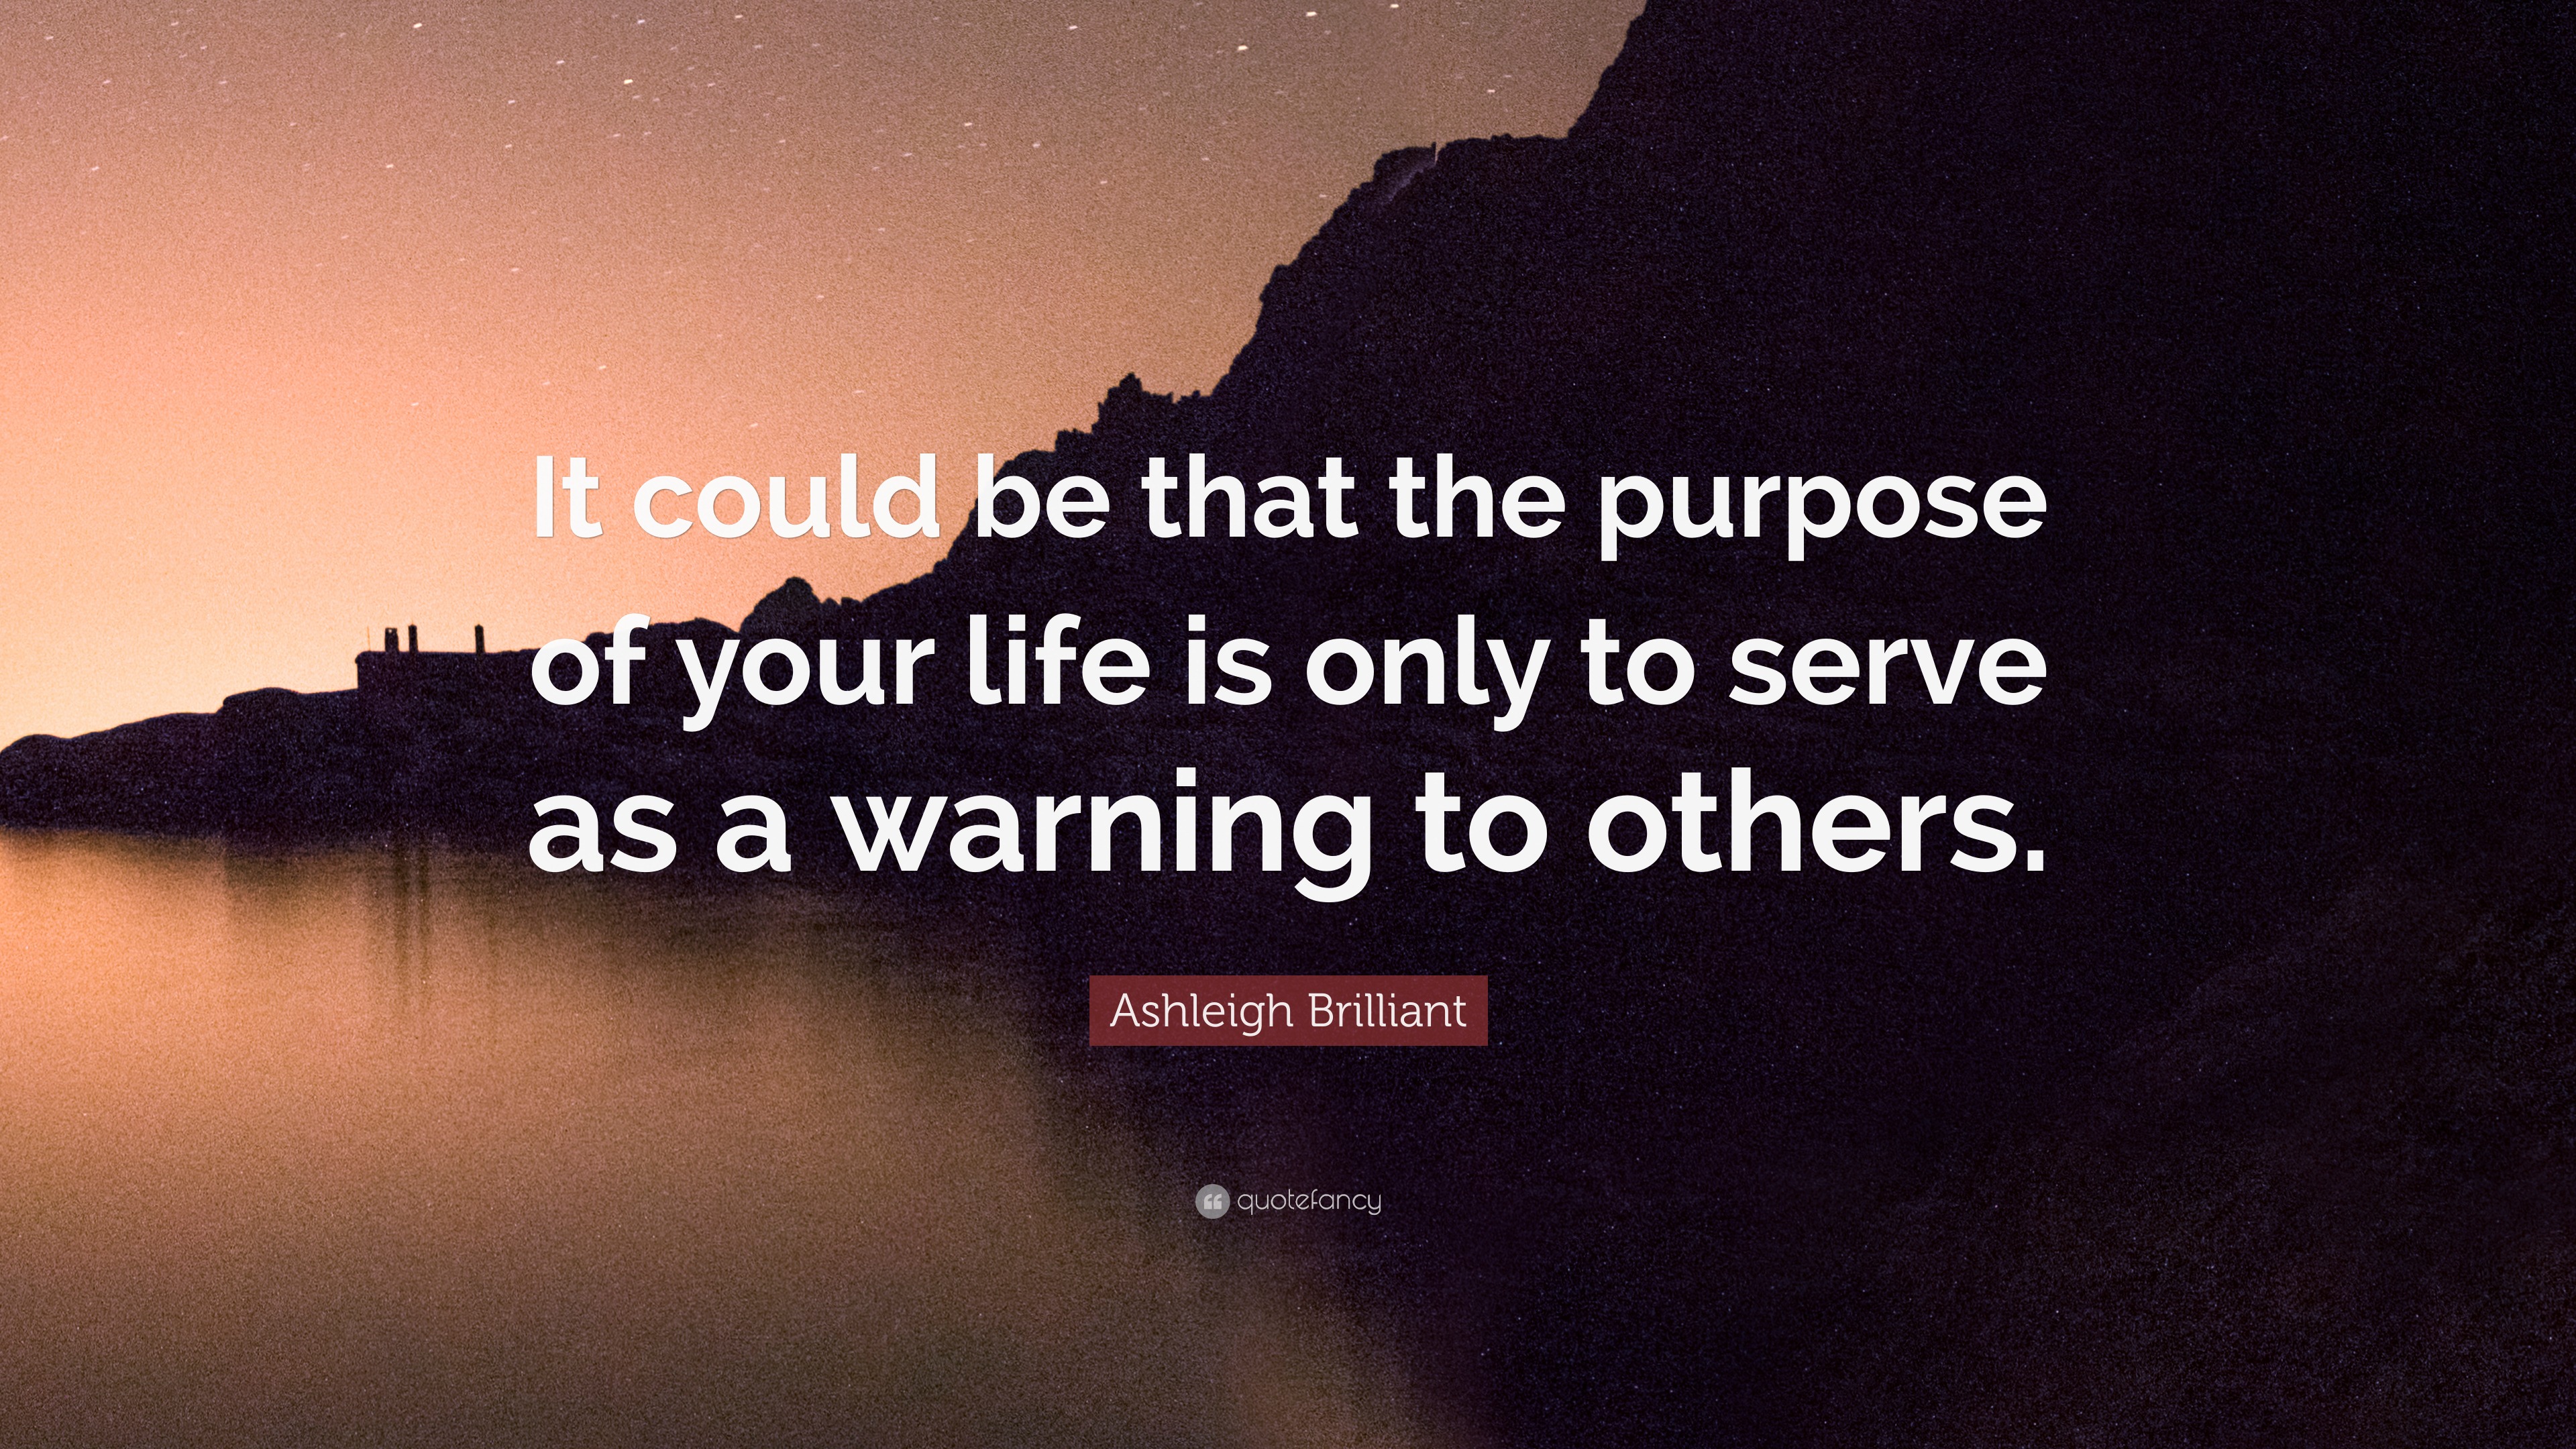 Ashleigh Brilliant Quote: “It could be that the purpose of your life is